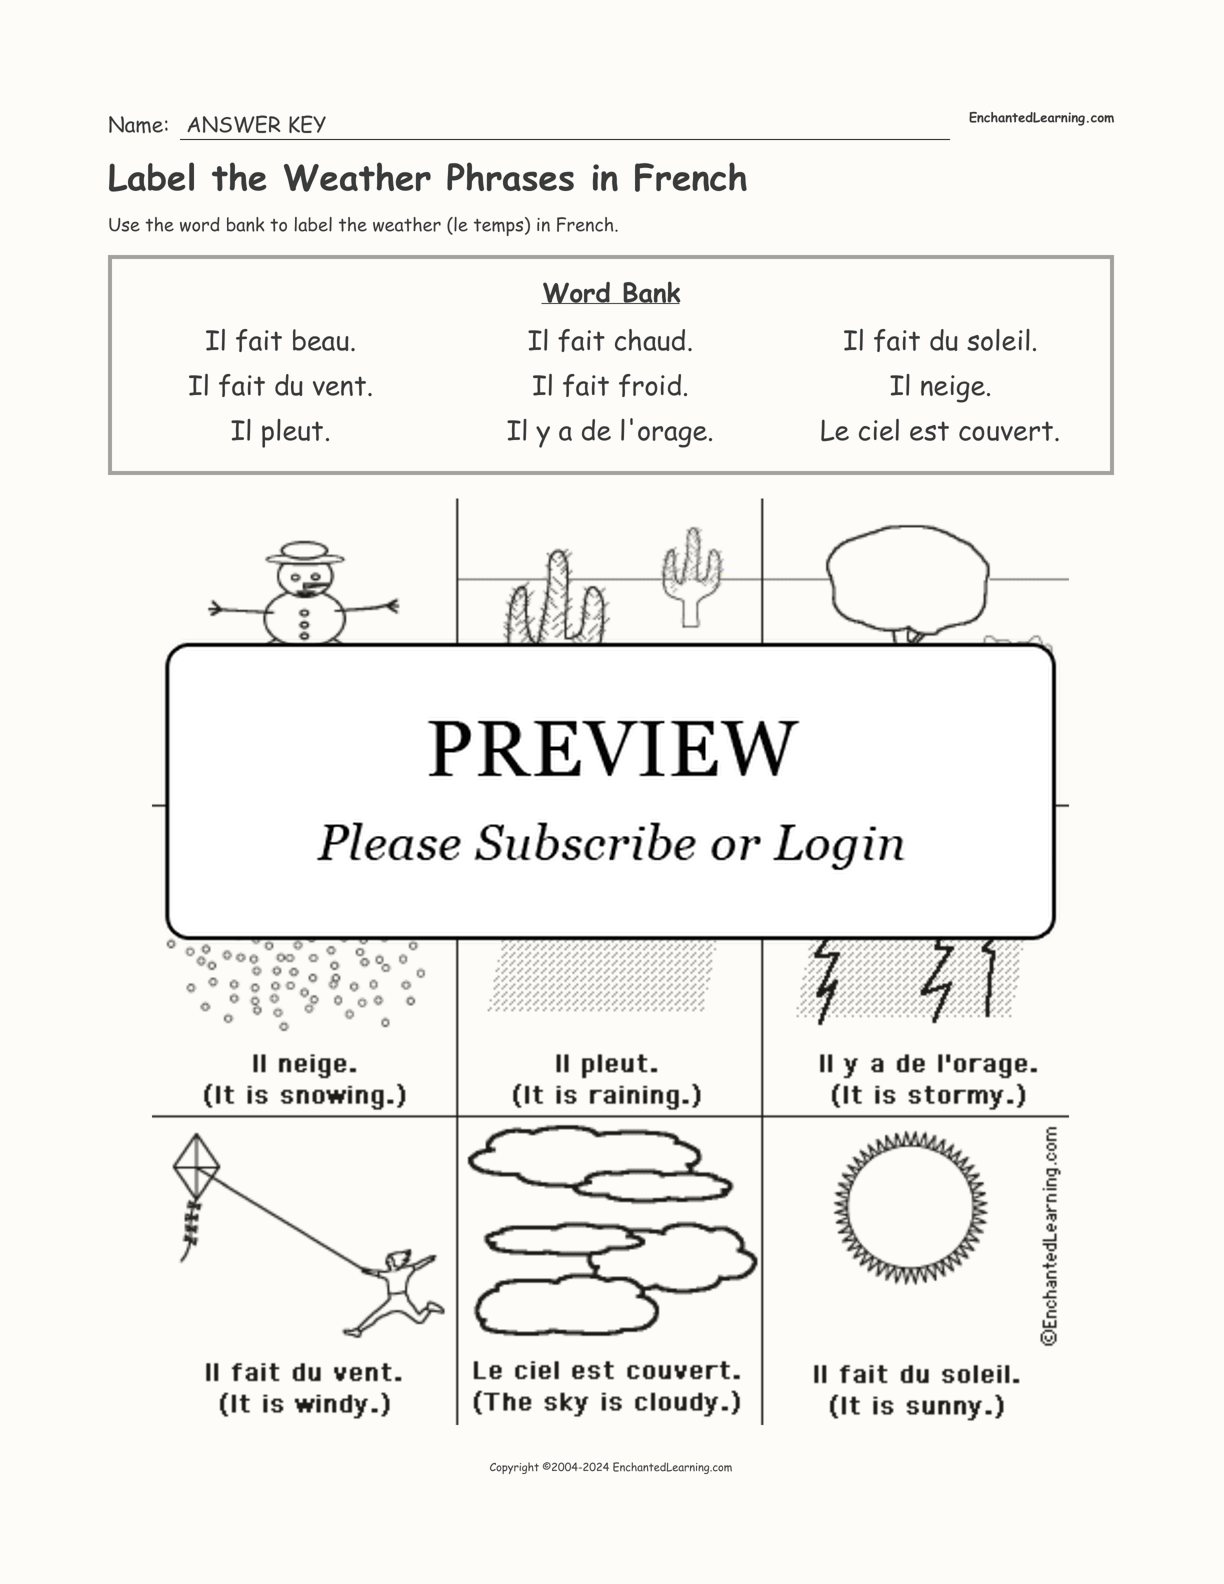 Label the Weather Phrases in French interactive worksheet page 2